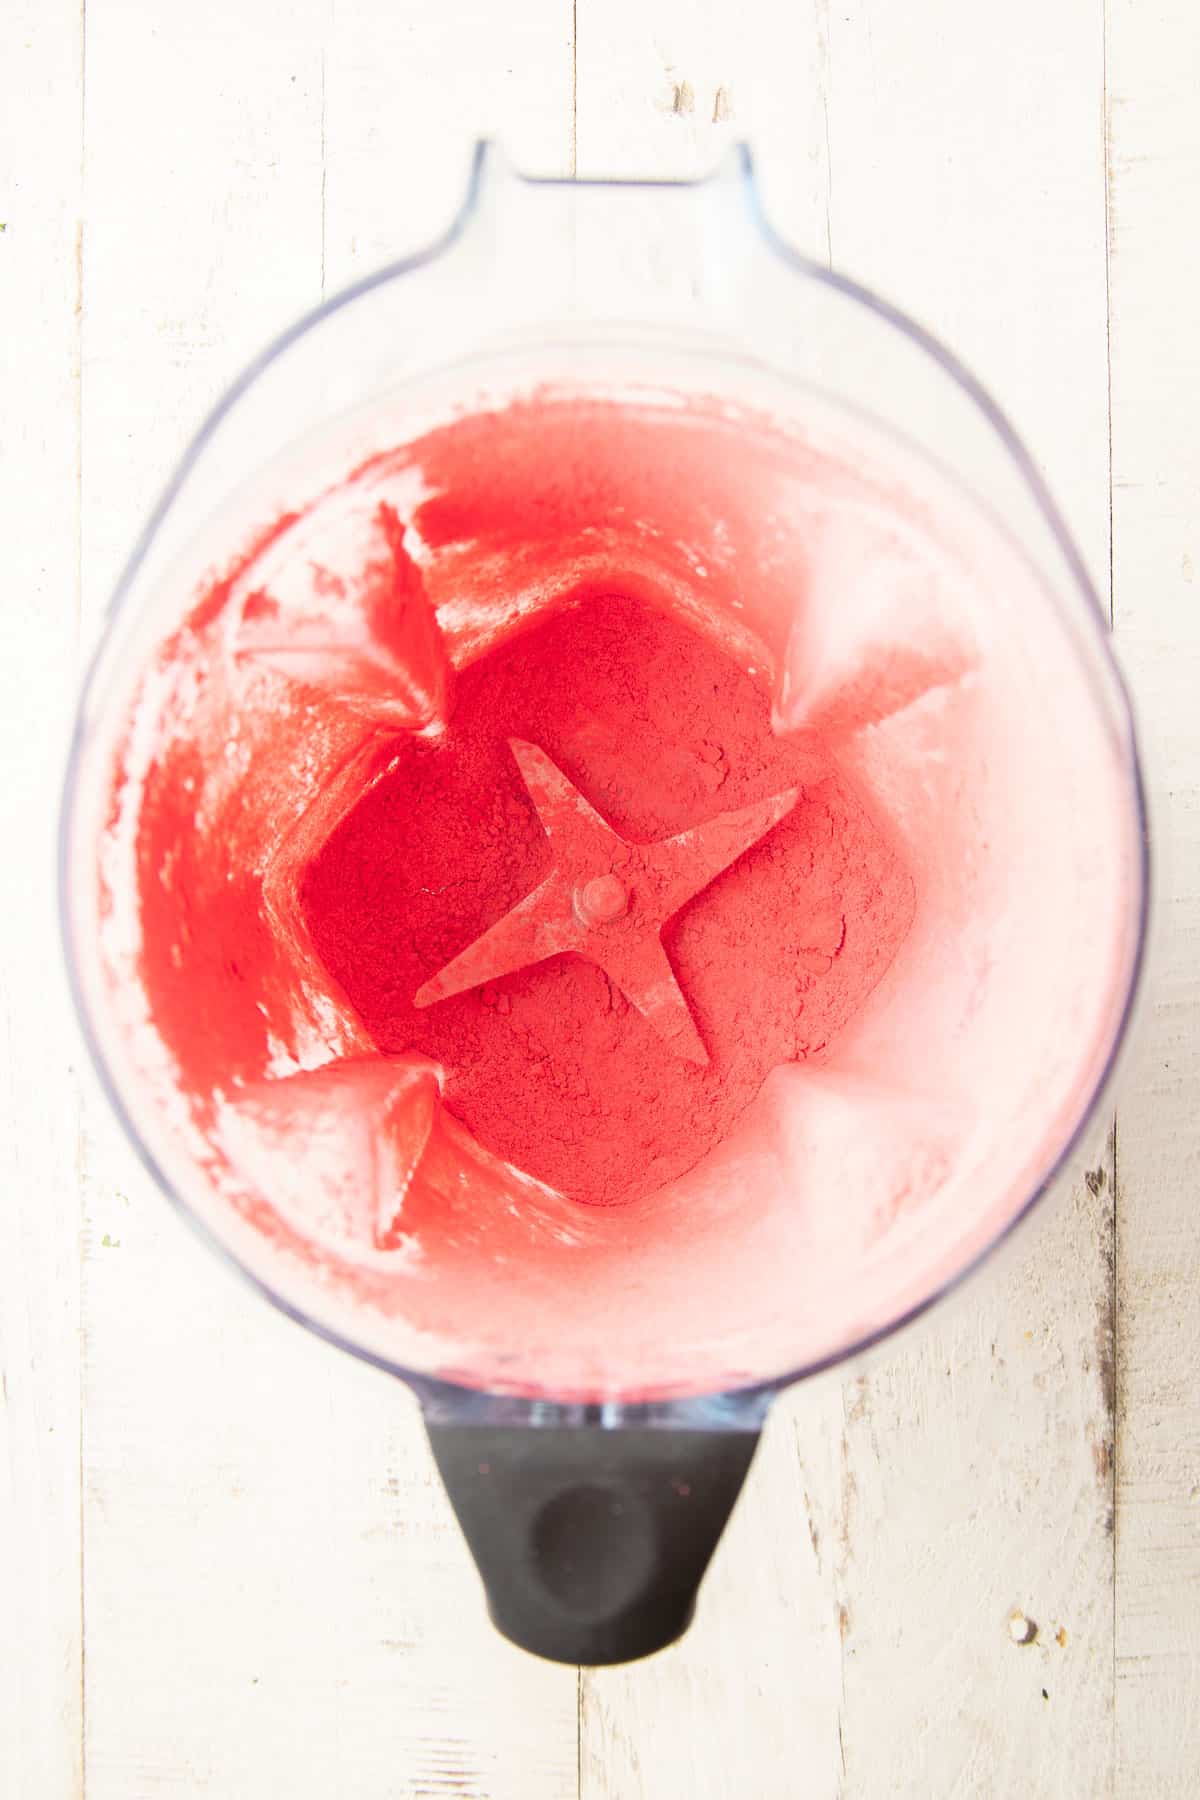 Powdered freeze dried strawberries in a blender.